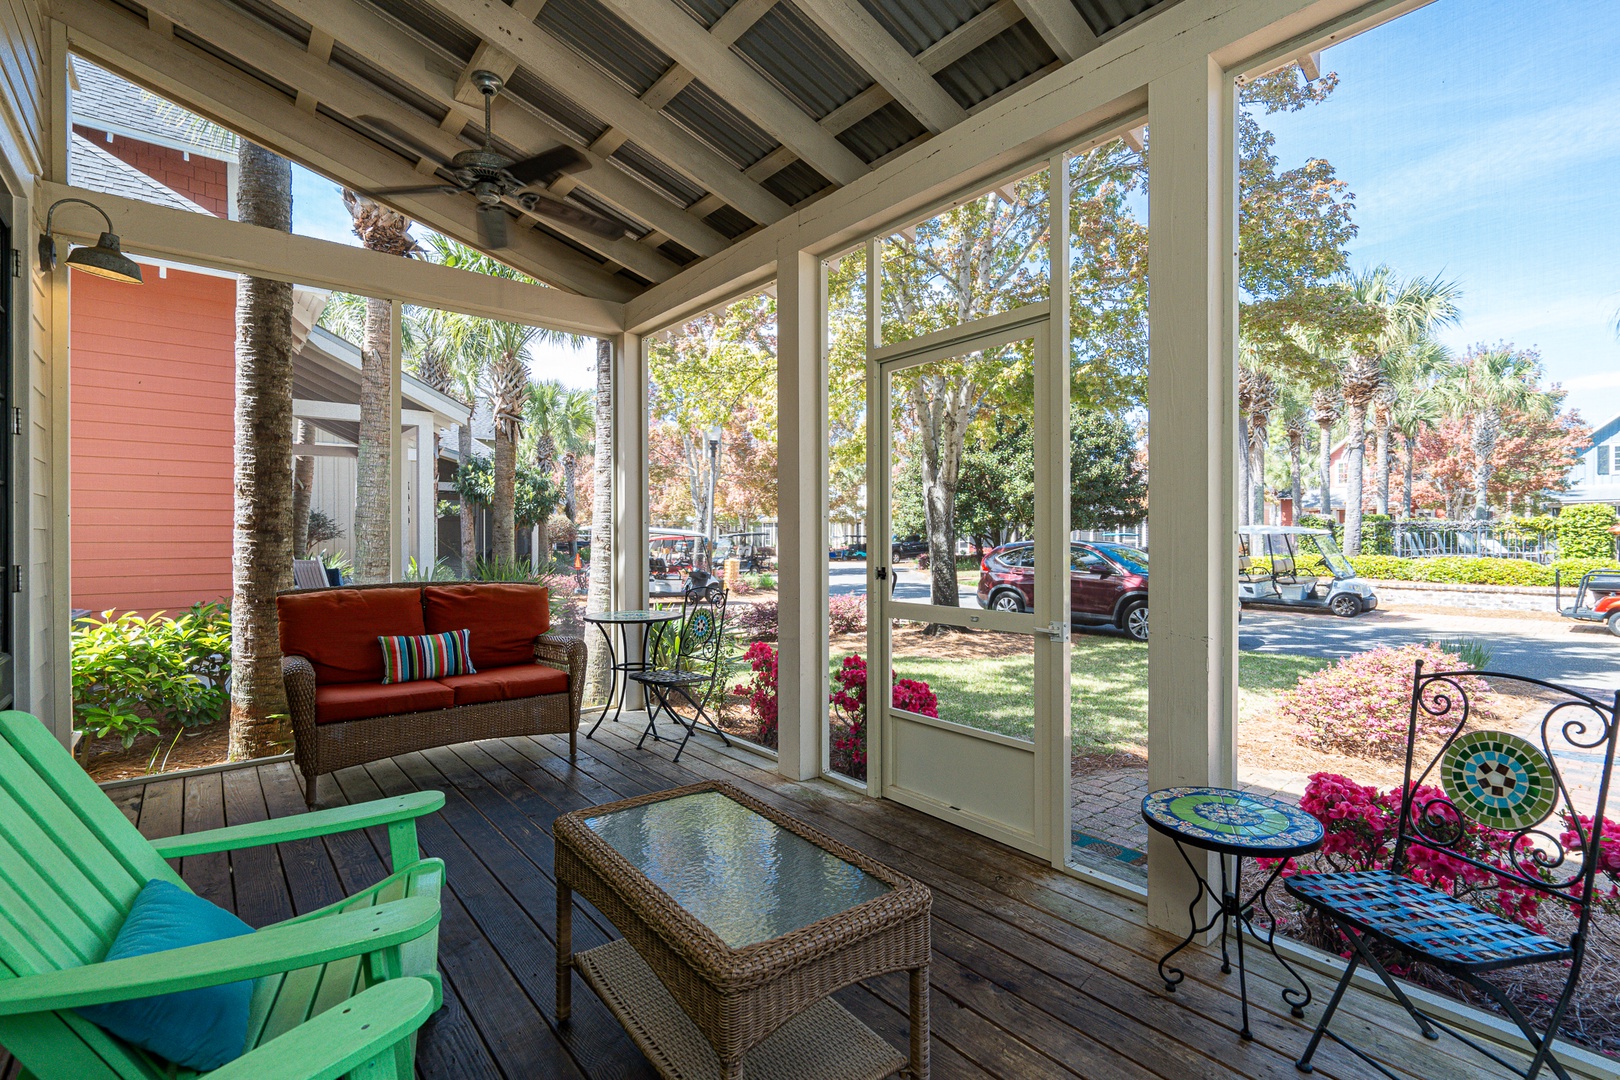 Screened in porch with outdoor seating